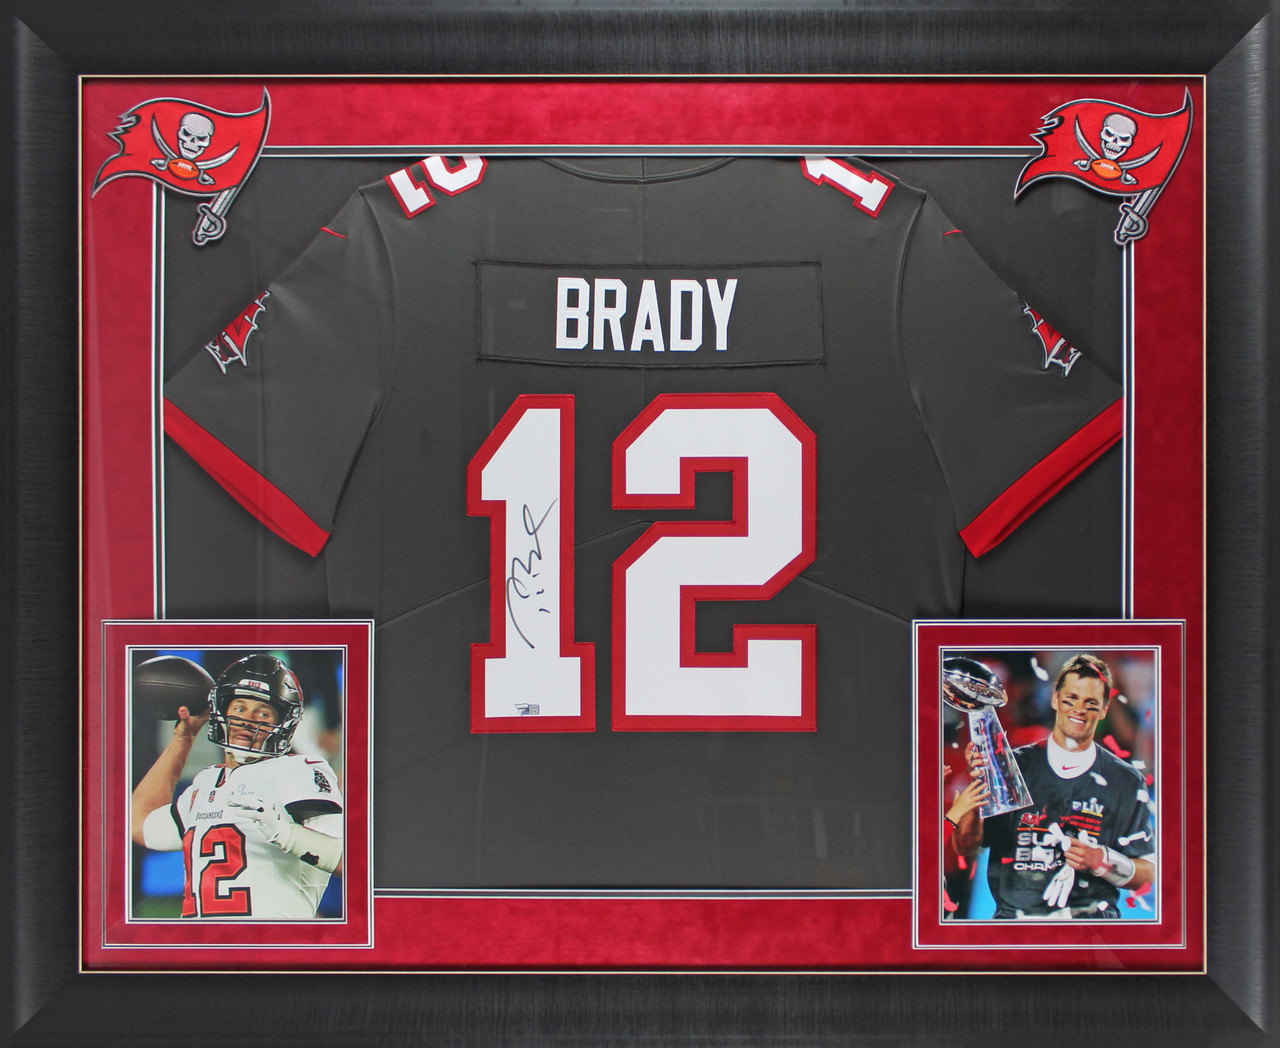 Tom Brady Autograph Jersey Tampa Bay Buccaneers Red Framed 37x45